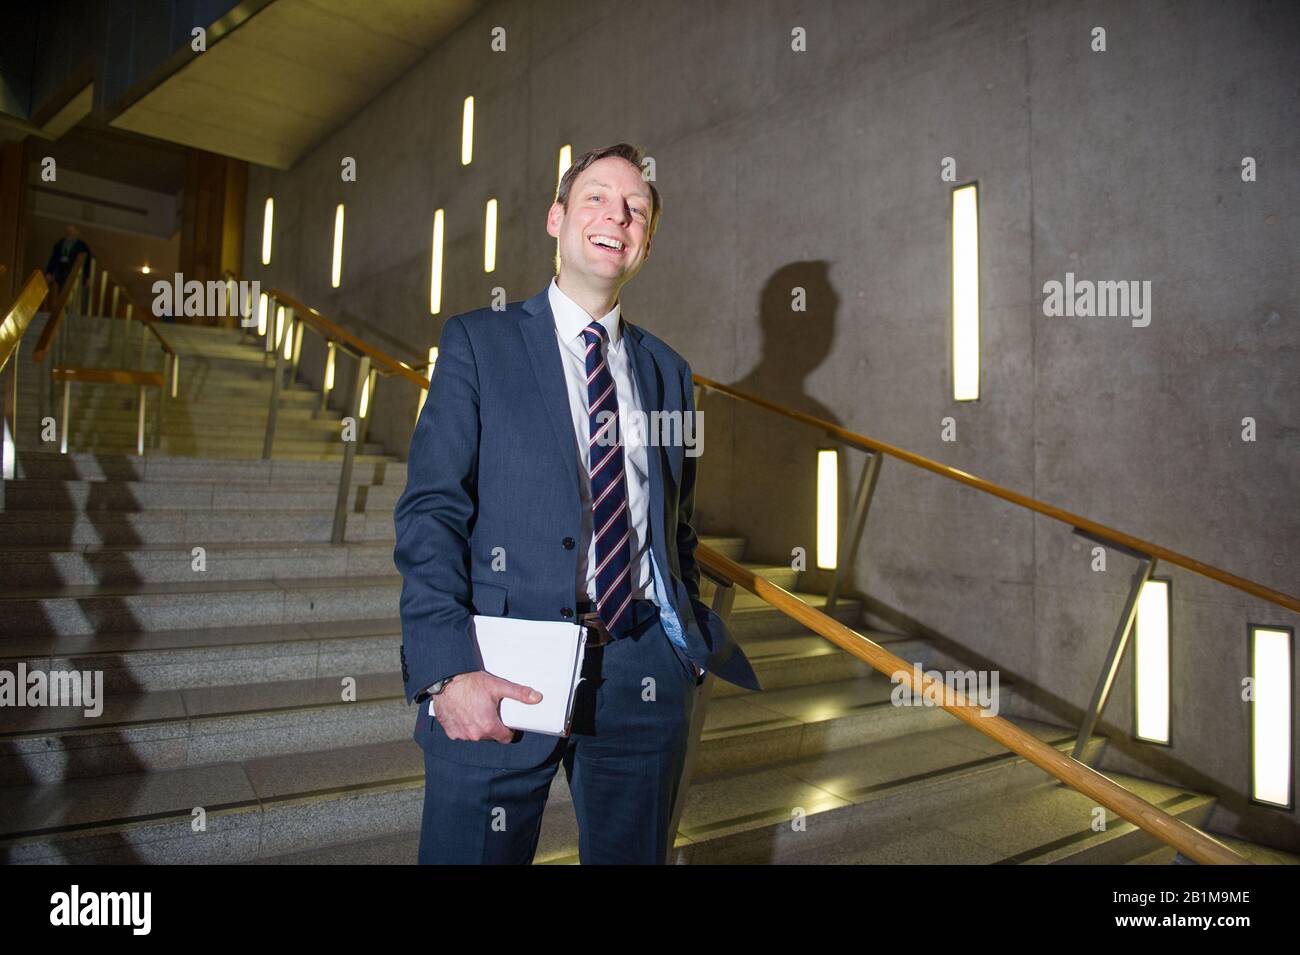 Edinburgh, UK. 26th Feb, 2020. Pictured: Liam Kerr MSP - Deputy Leader, Shadow Cabinet Secretary for Justice. Scenes from thee Scottish Parliament after decision time in the Chamber. Credit: Colin Fisher/Alamy Live News Stock Photo